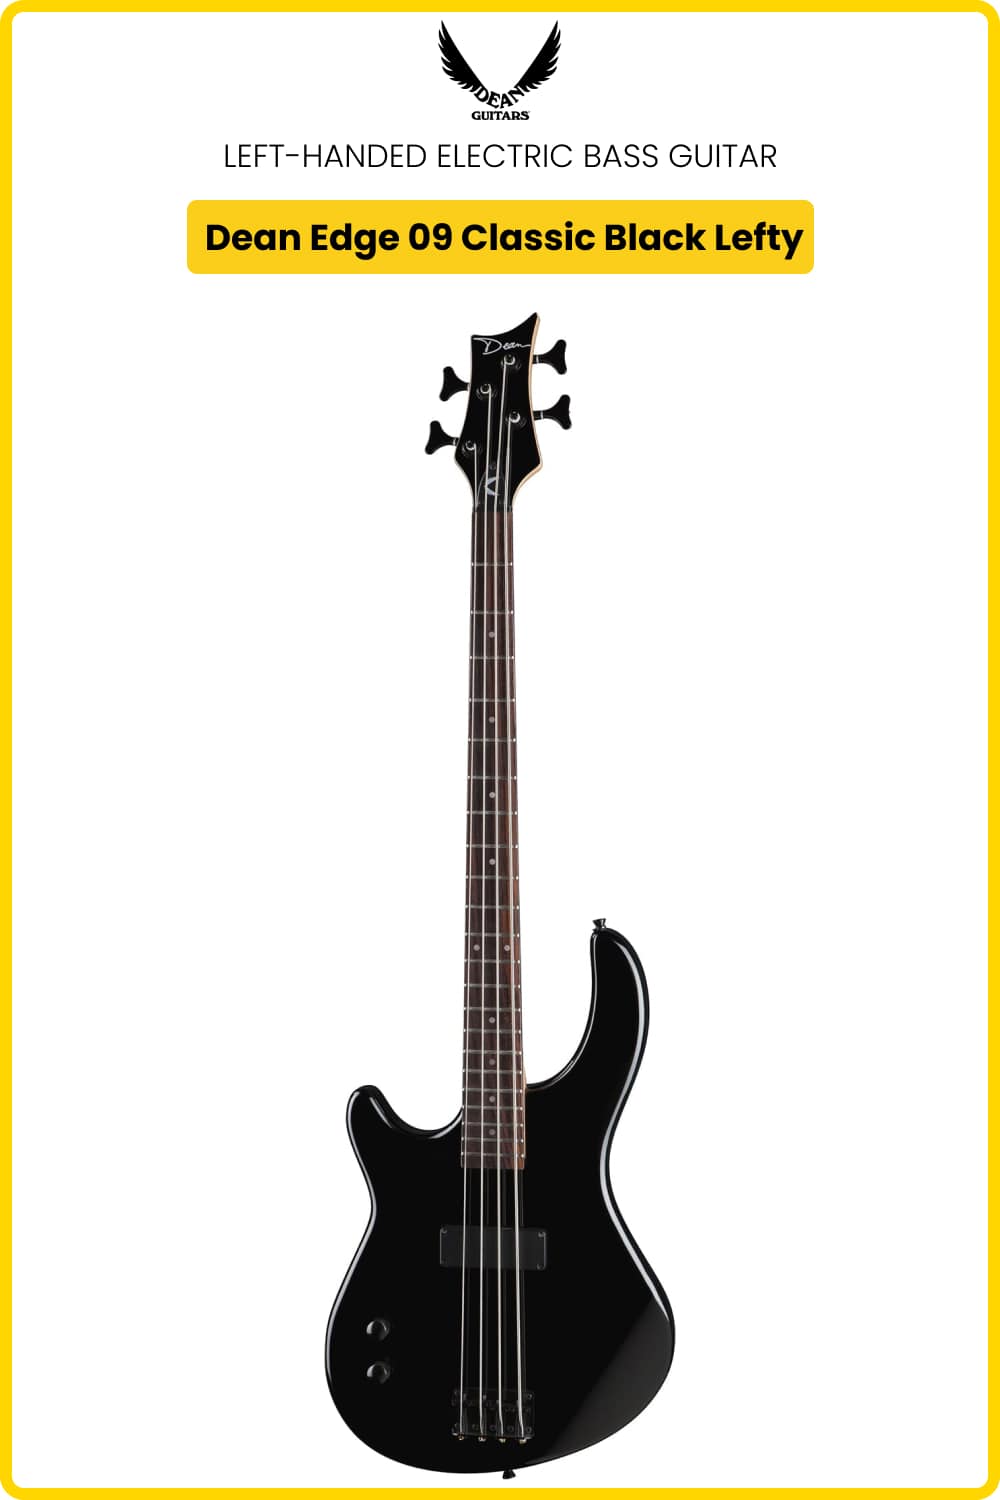 Left-Handed electric bass Dean Edge 09 Classic Black Lefty